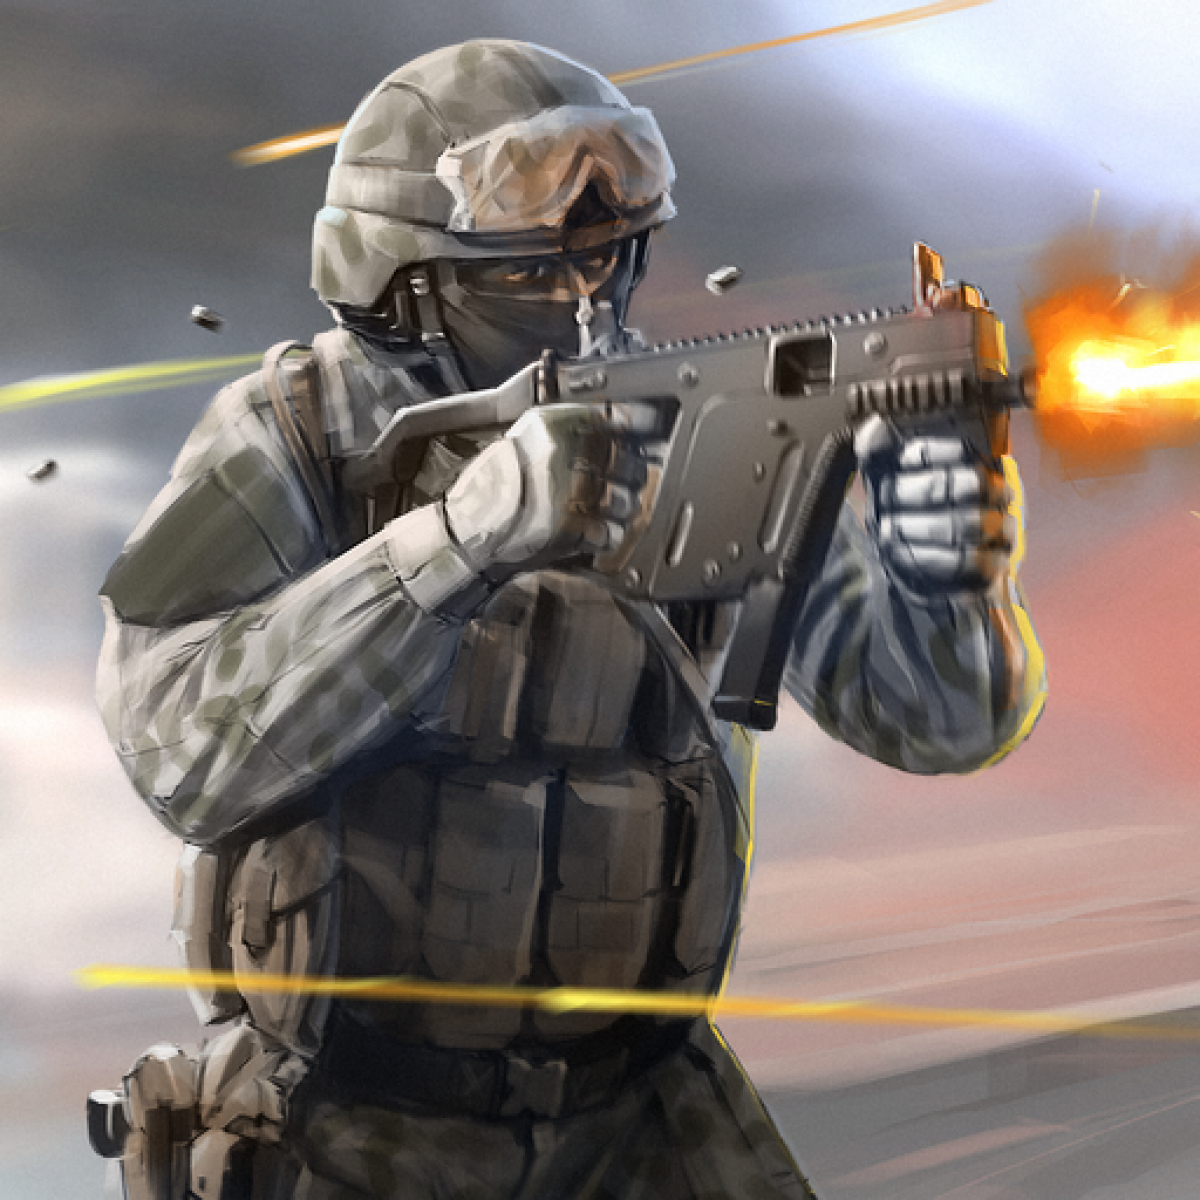 Bullet Force 1.81.1 (Unlimited Ammo) Apk+Data